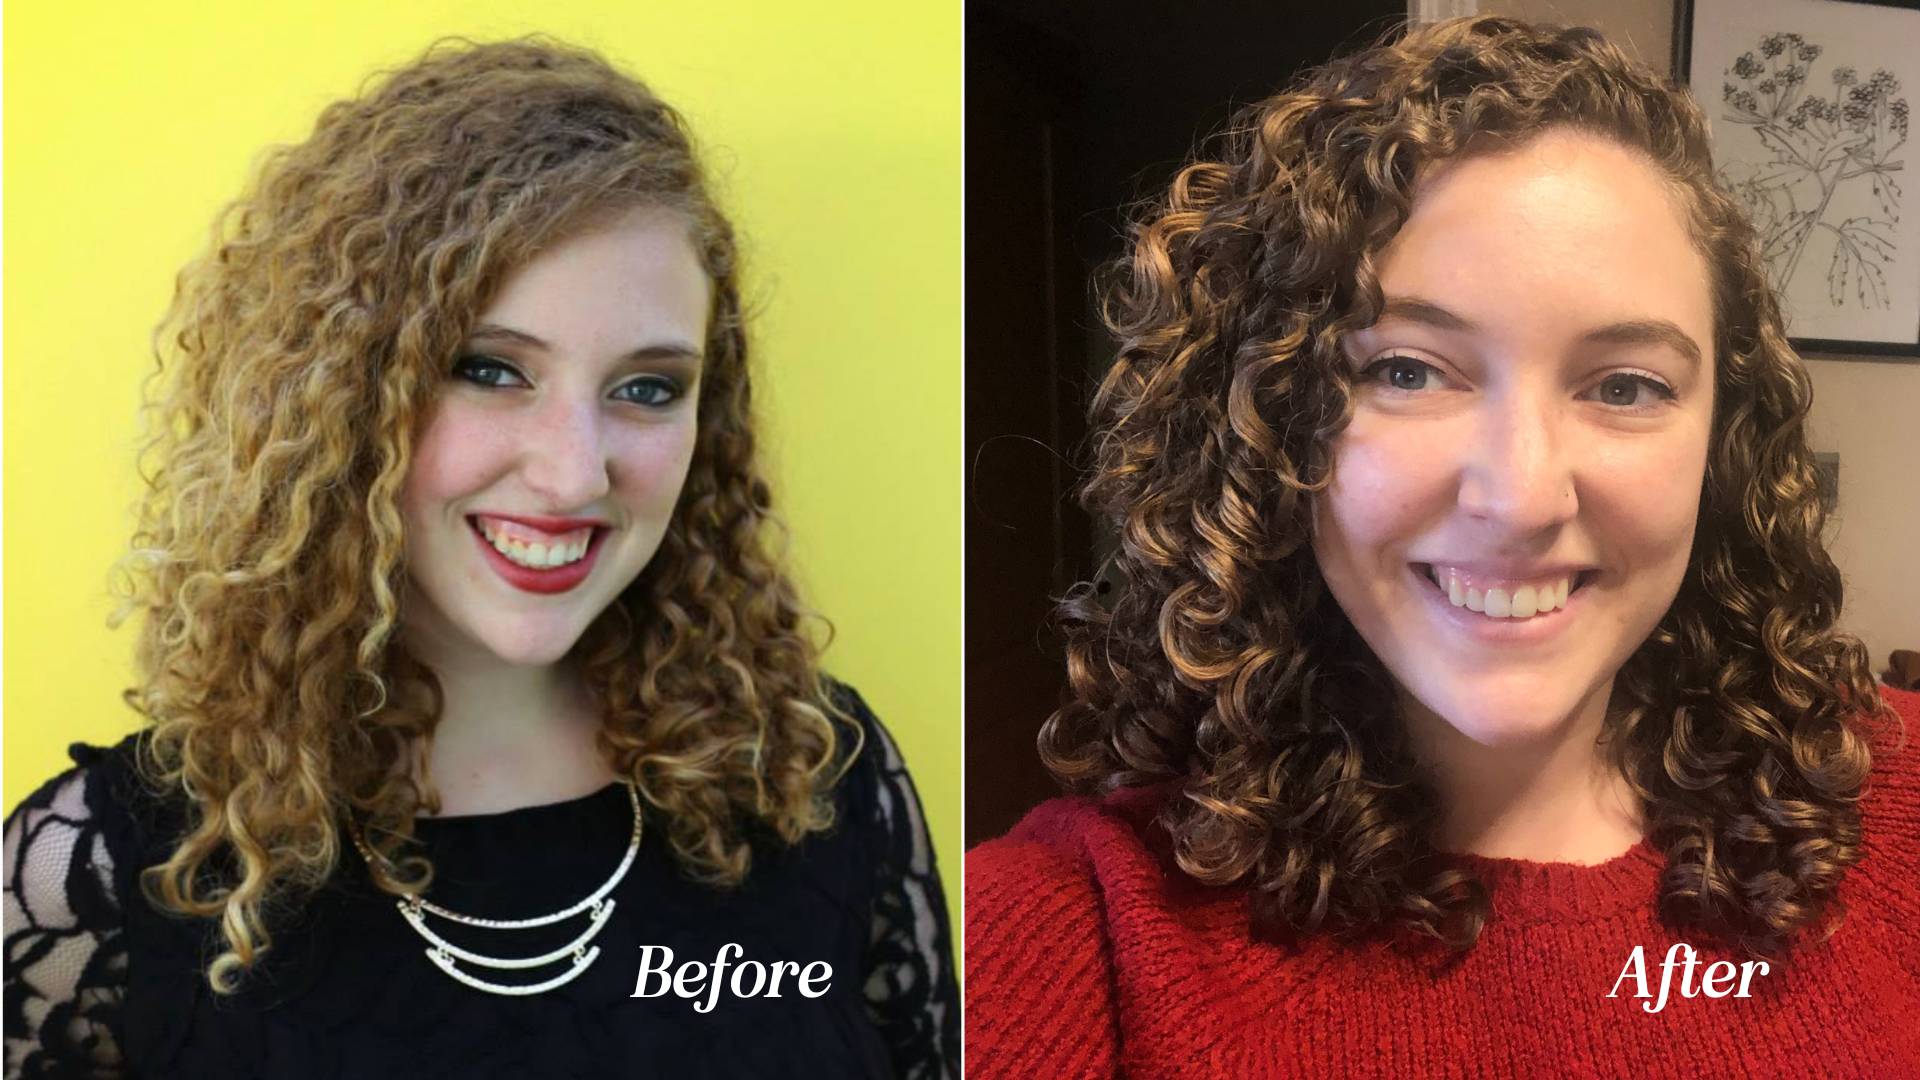 Before and after pictures of Mara's curly hair